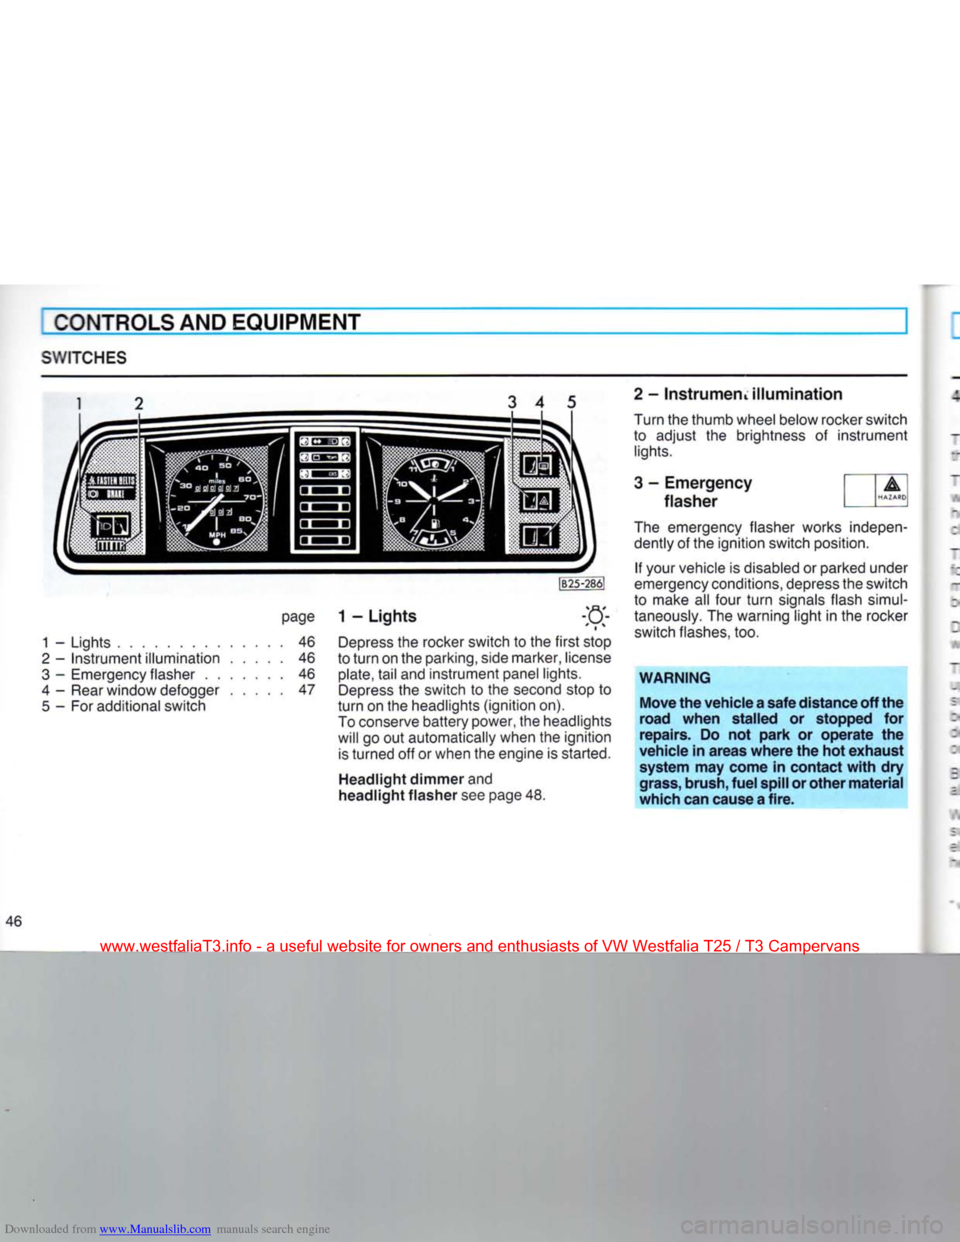 VOLKSWAGEN TRANSPORTER 1990 T4 / 4.G Service Manual Downloaded from www.Manualslib.com manuals search engine 
CONTROLS AND EQUIPMENT 

SWITCHES 
3 4 5 

page
 1 - Lights 

1
 -
 Lights
 46 

2
 -
 Instrument illumination
 46 

3
 -
 Emergency flasher
 